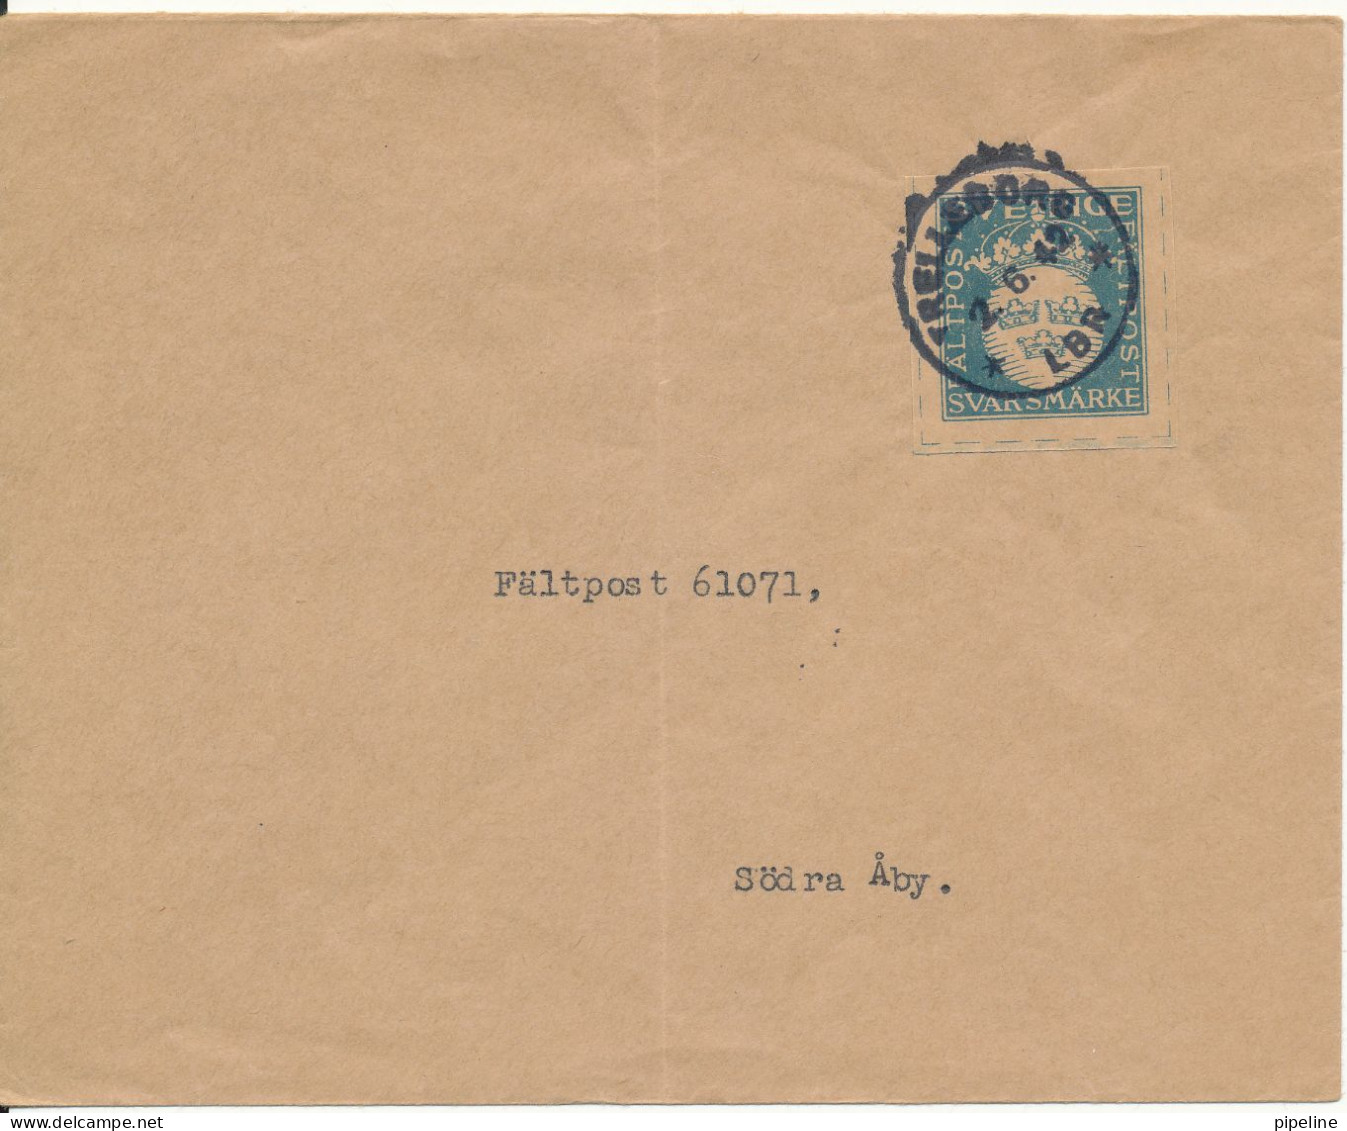 Sweden Feldpost Cover Trelleborg 2-6-1942 (the Cover Is Damaged) - Military